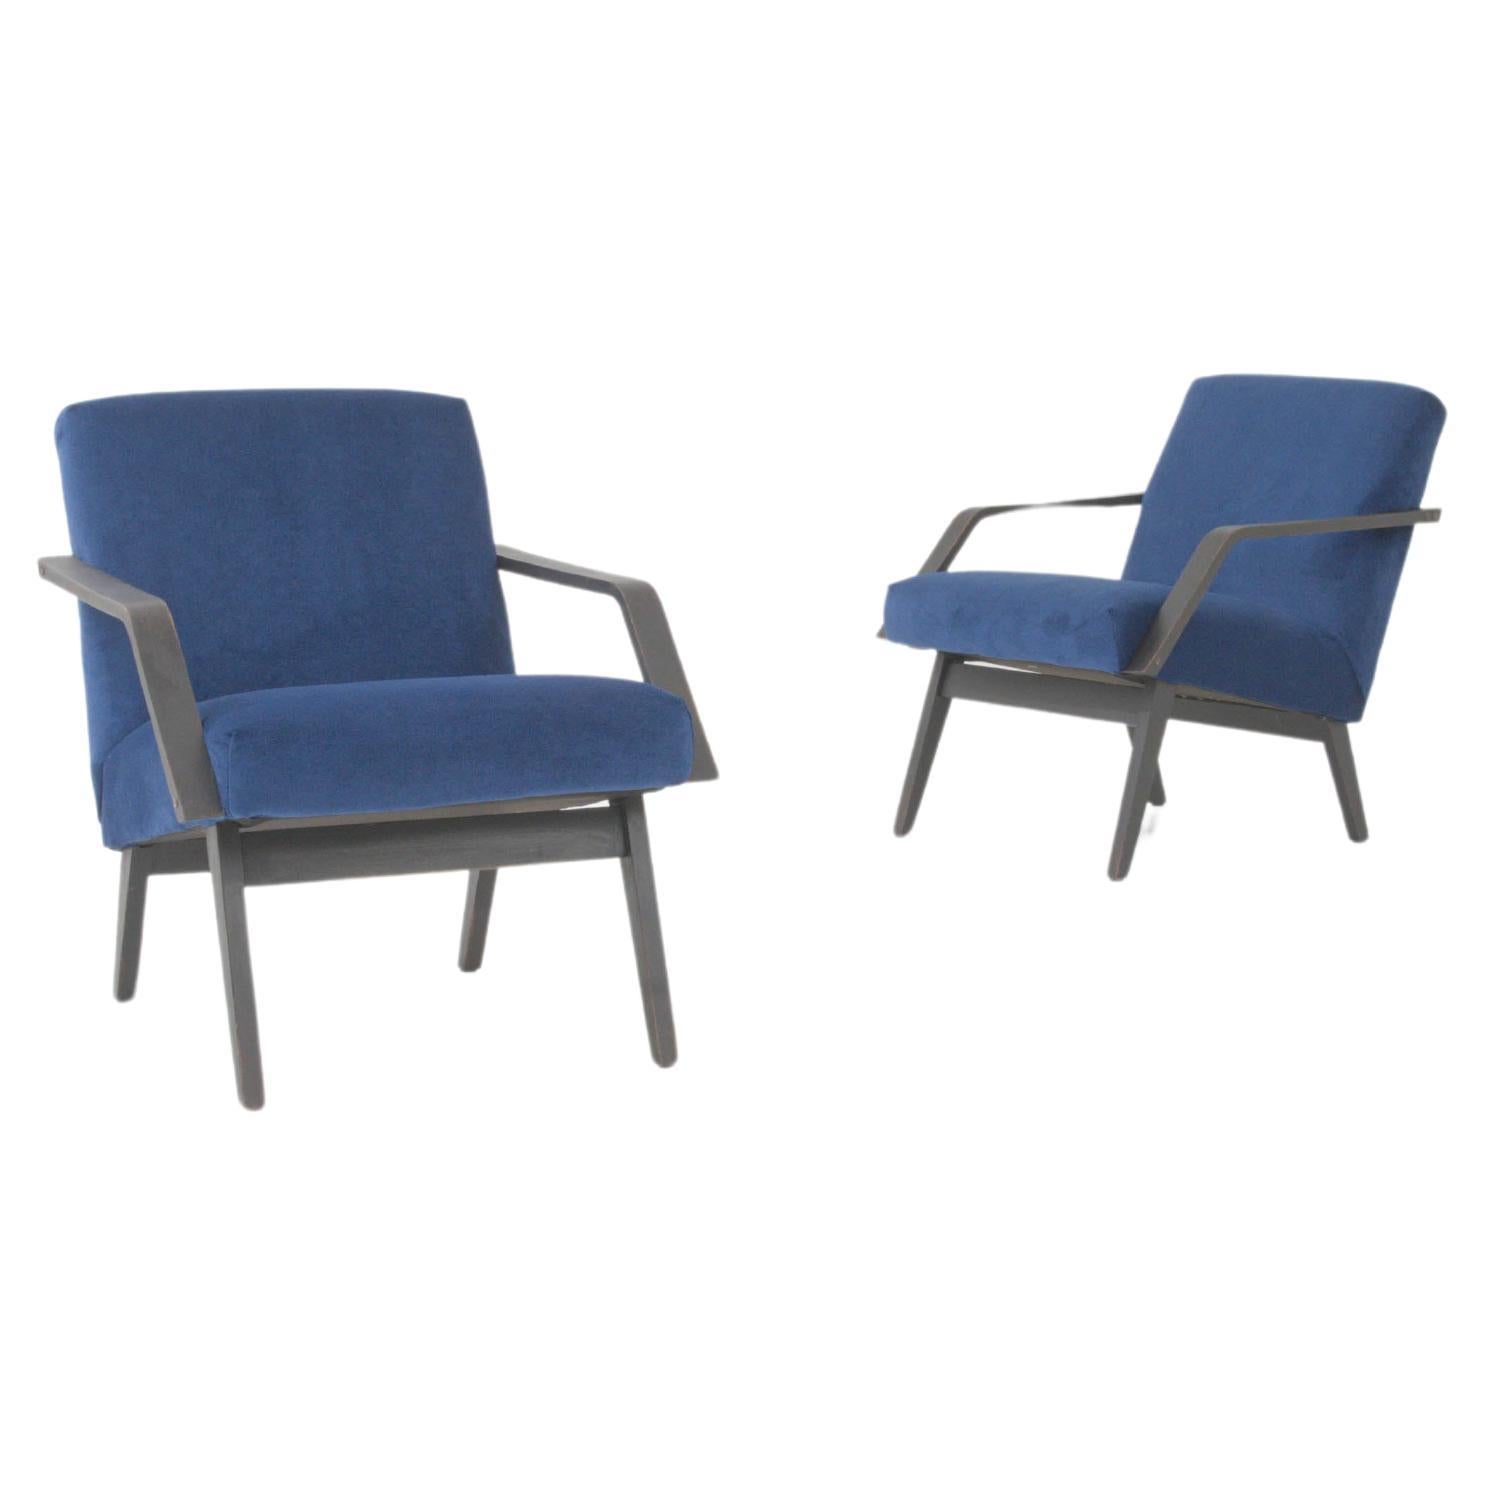 1960s Czech Upholstered Armchairs by TON, a Pair